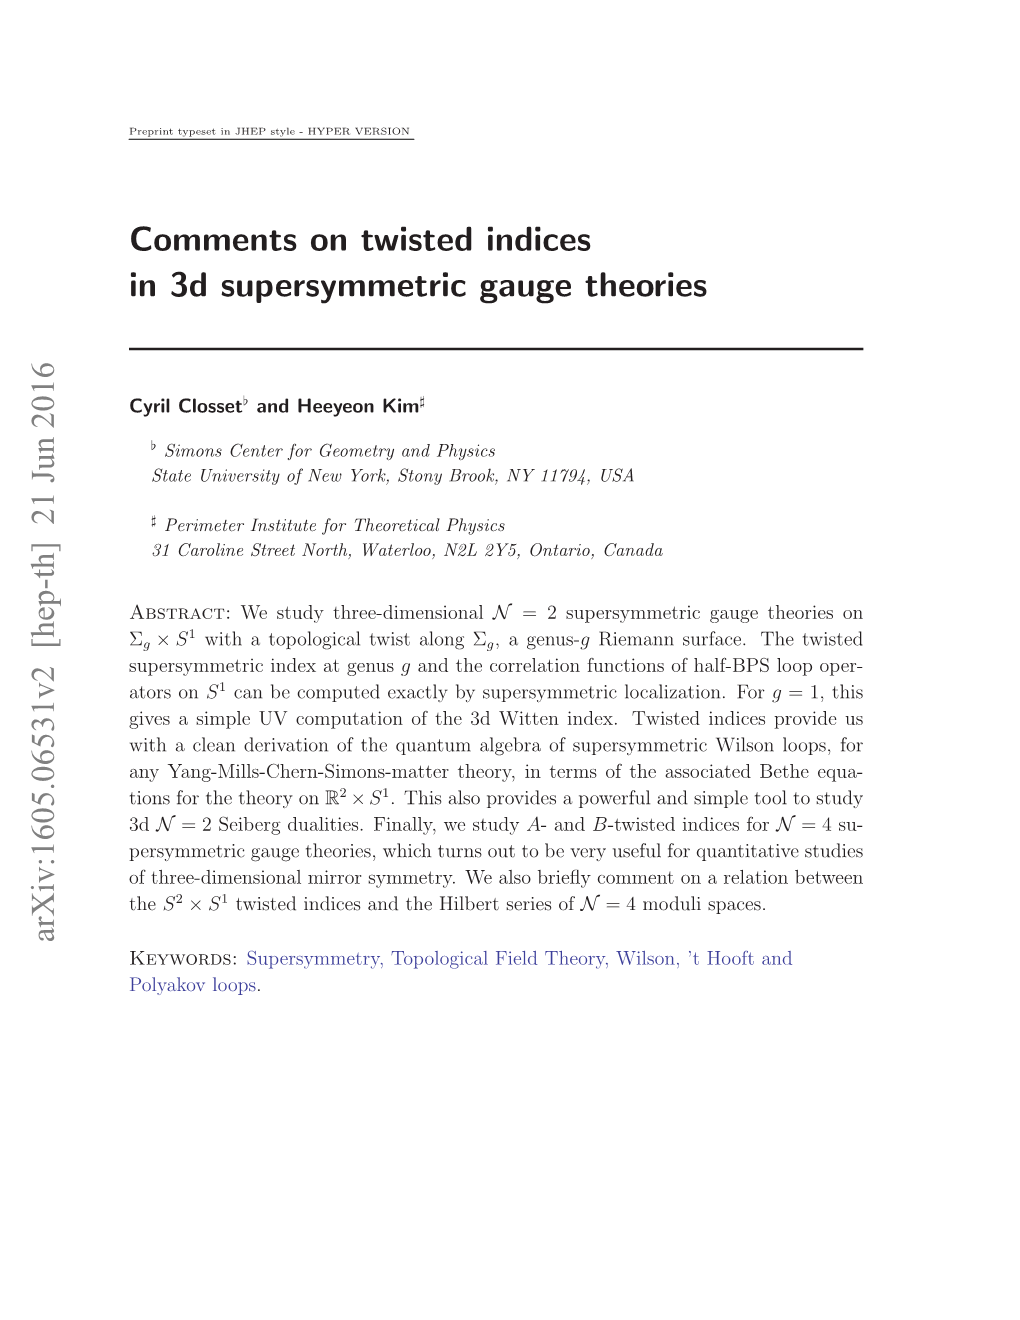 Comments on Twisted Indices in 3D Supersymmetric Gauge Theories